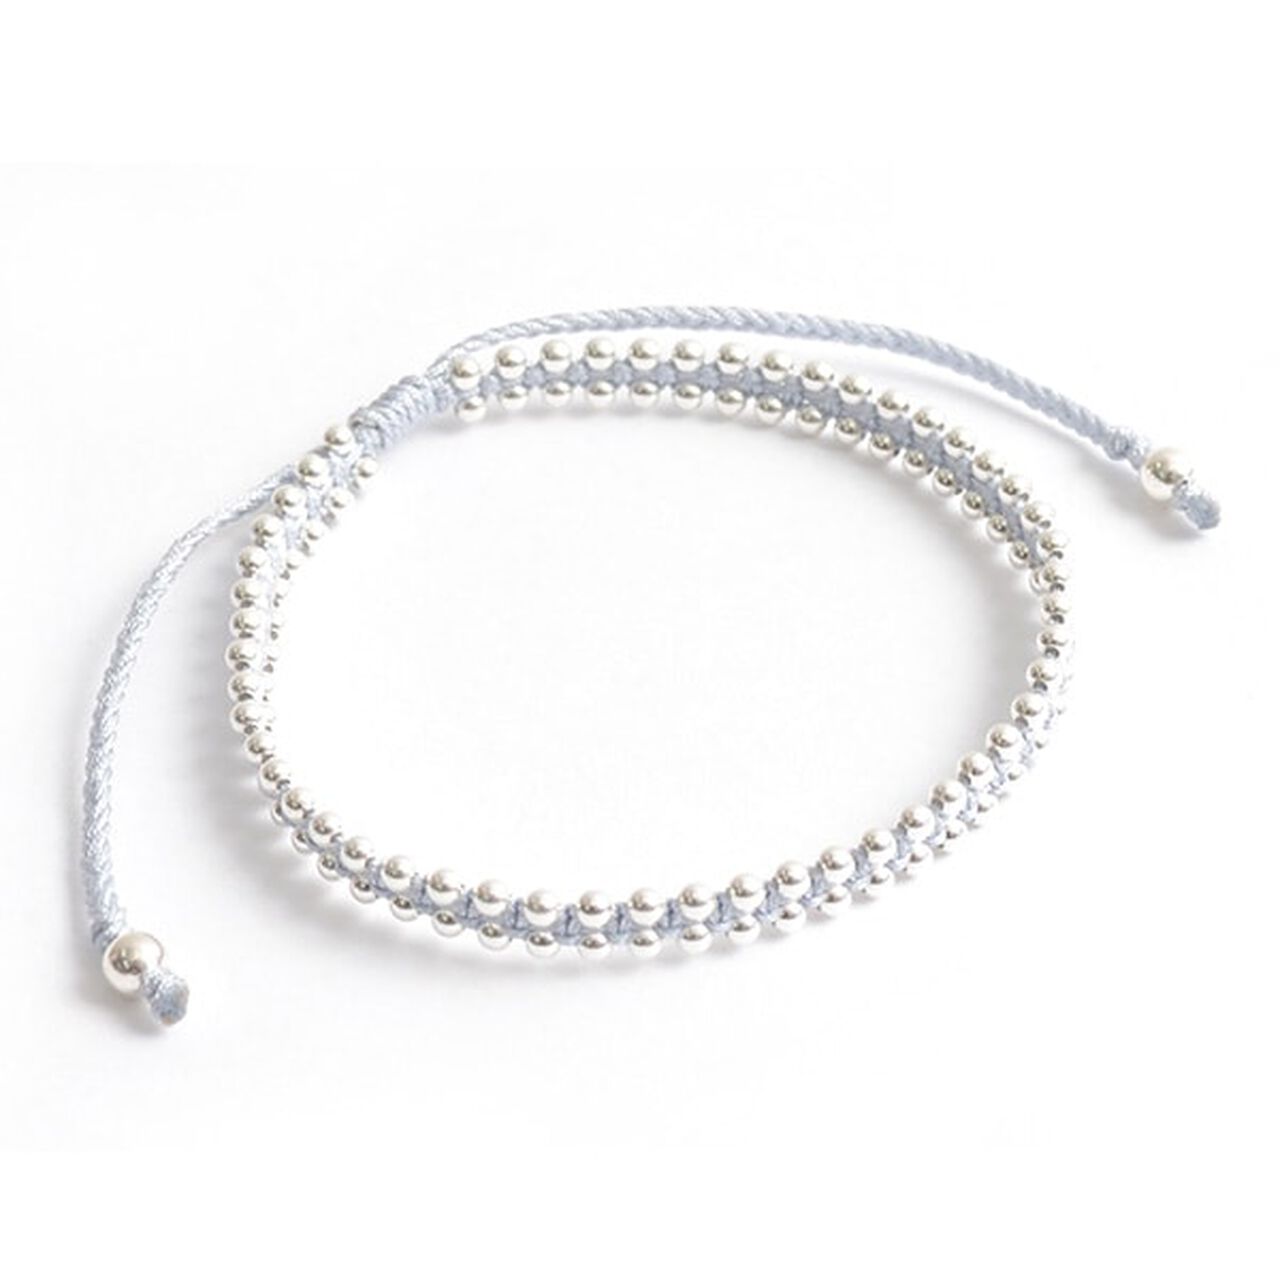 Silver Ball Beads Duo Bracelet,Grey, large image number 0